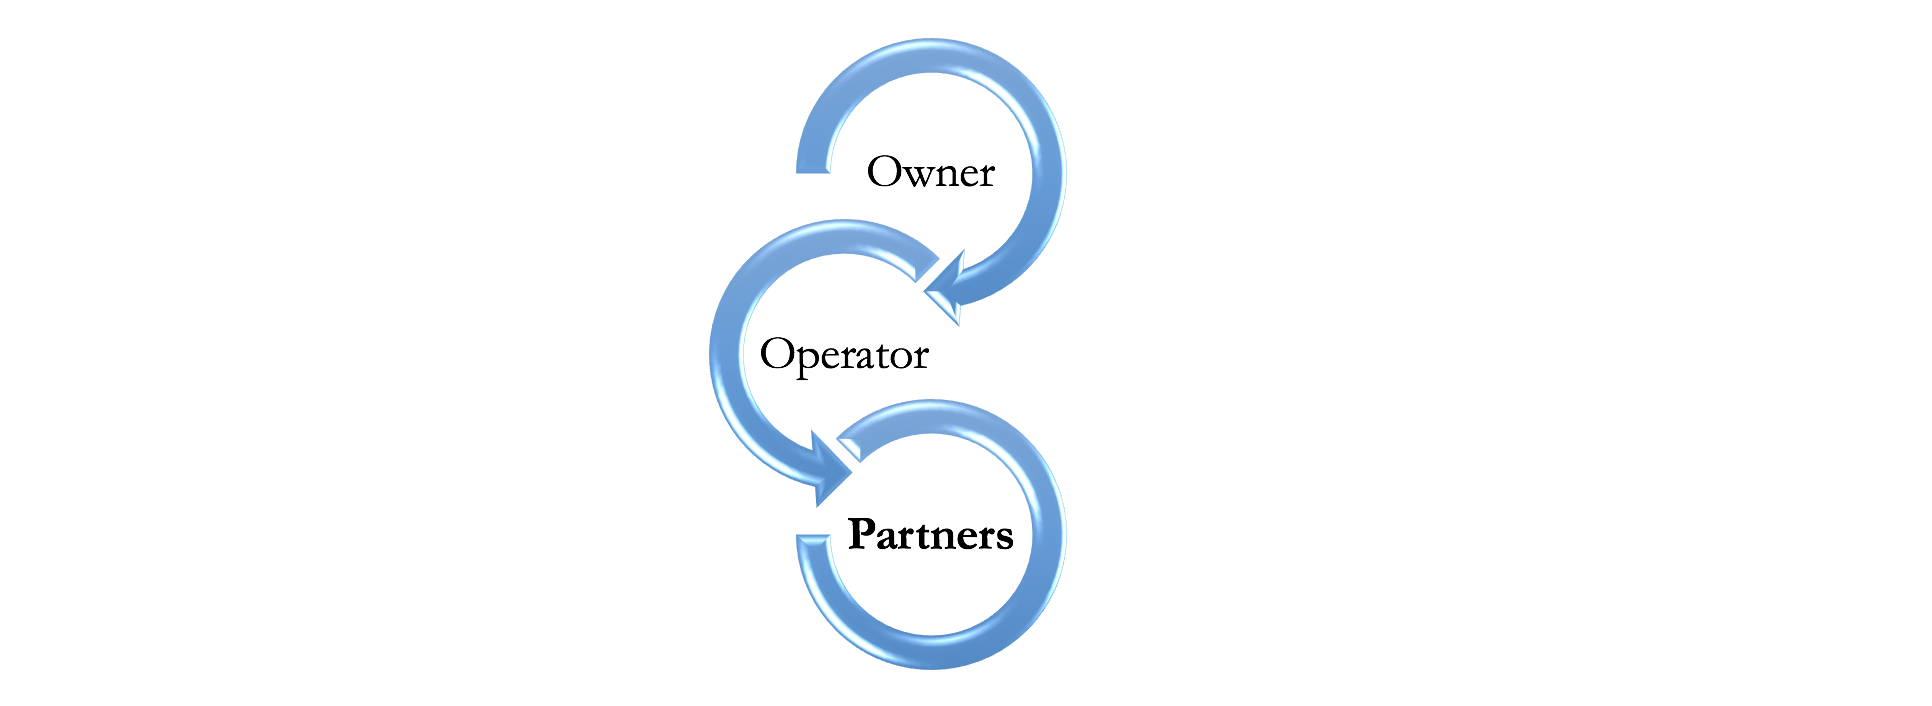 Relationship between owner, operator, and partners.